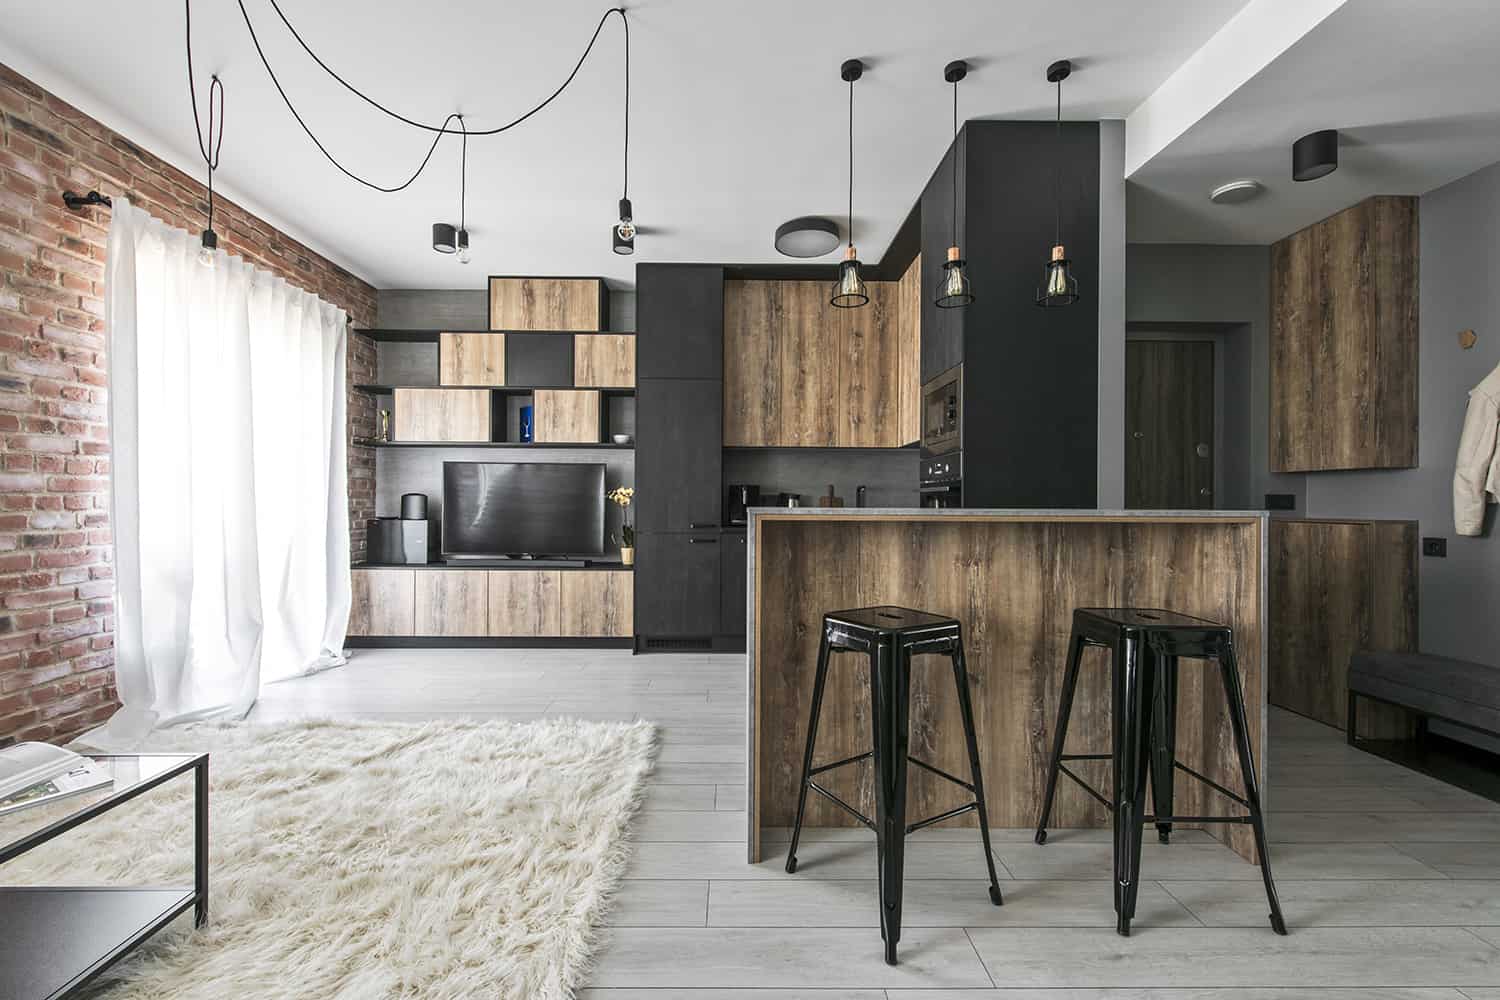 Small industrial apartment in Lithuania gets an inspiring update